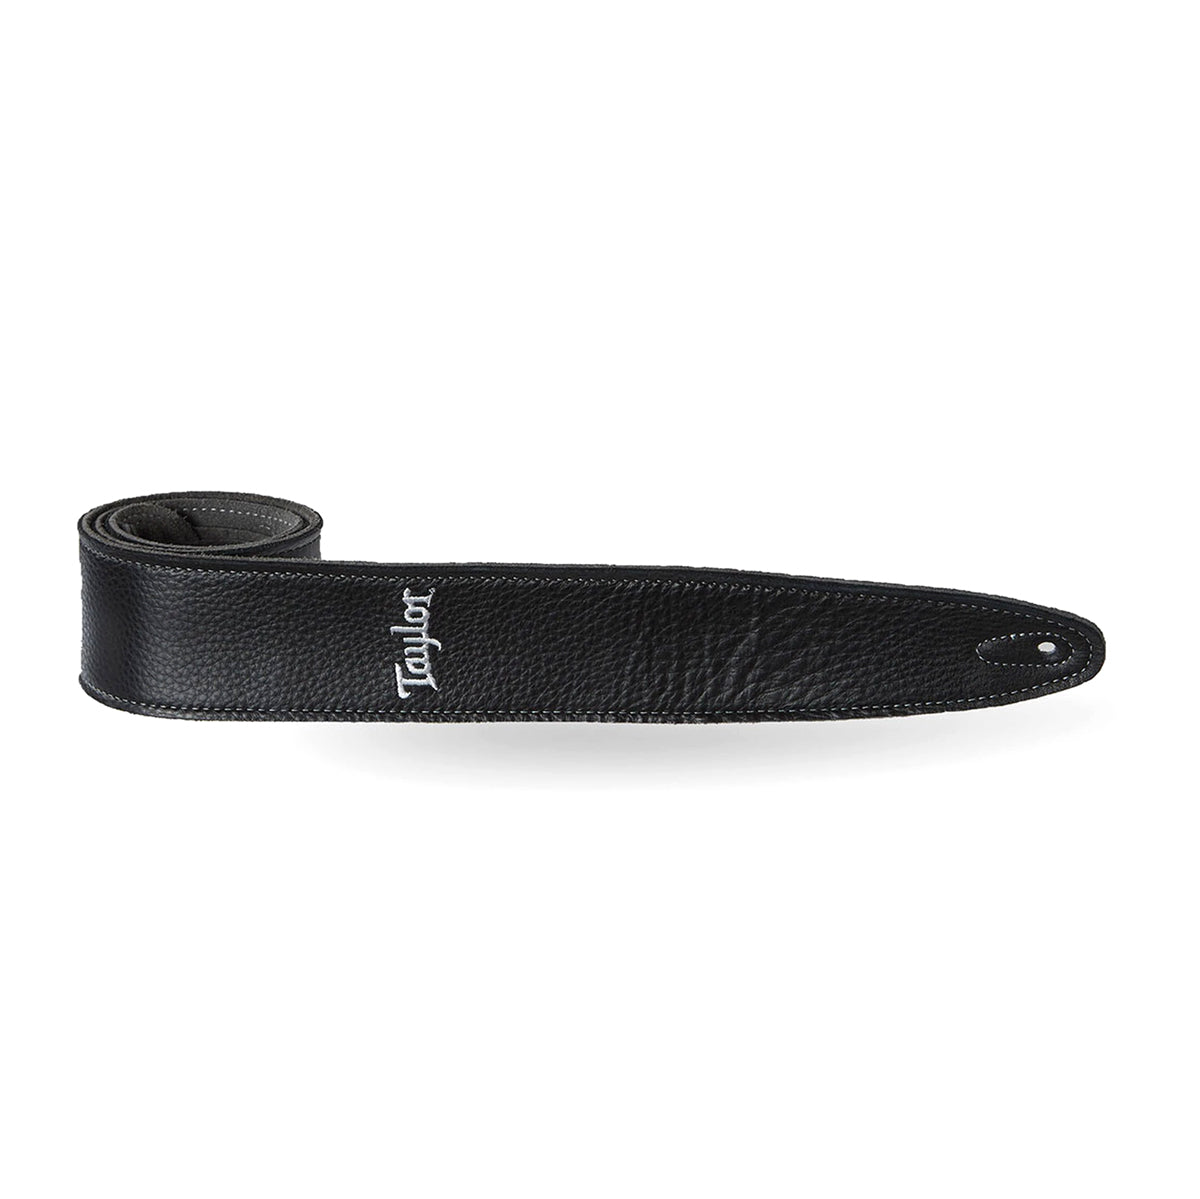 Taylor TL251-06 Strap, Black Leather, Suede Back, Silver Logo, 2.5in.